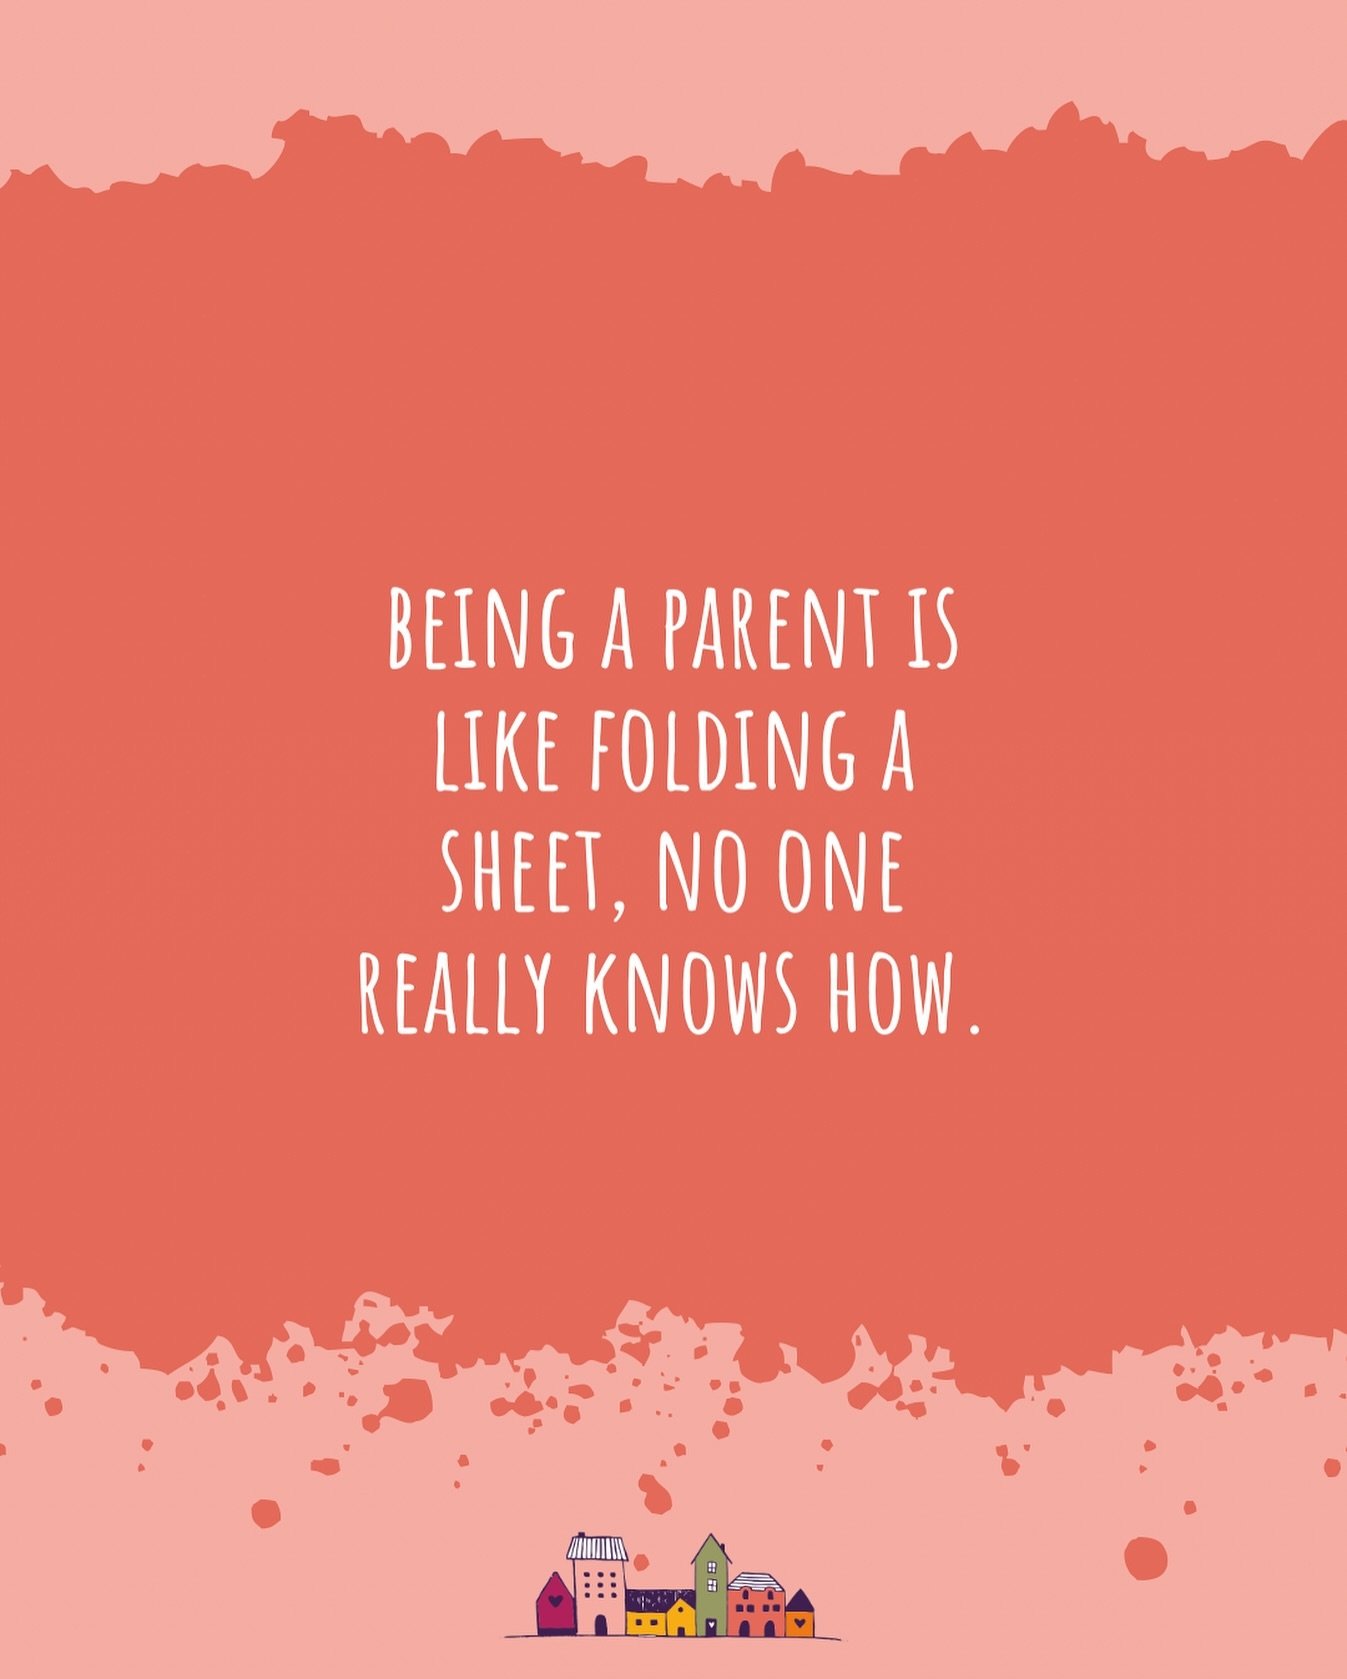 As a parenting coach, I understand the feeling all too well! Just when you think you&rsquo;ve got it figured out, a new challenge unfolds!!

Remember, it&rsquo;s okay not to have all the answers. 

Embrace the messy moments, learn along the way, and 